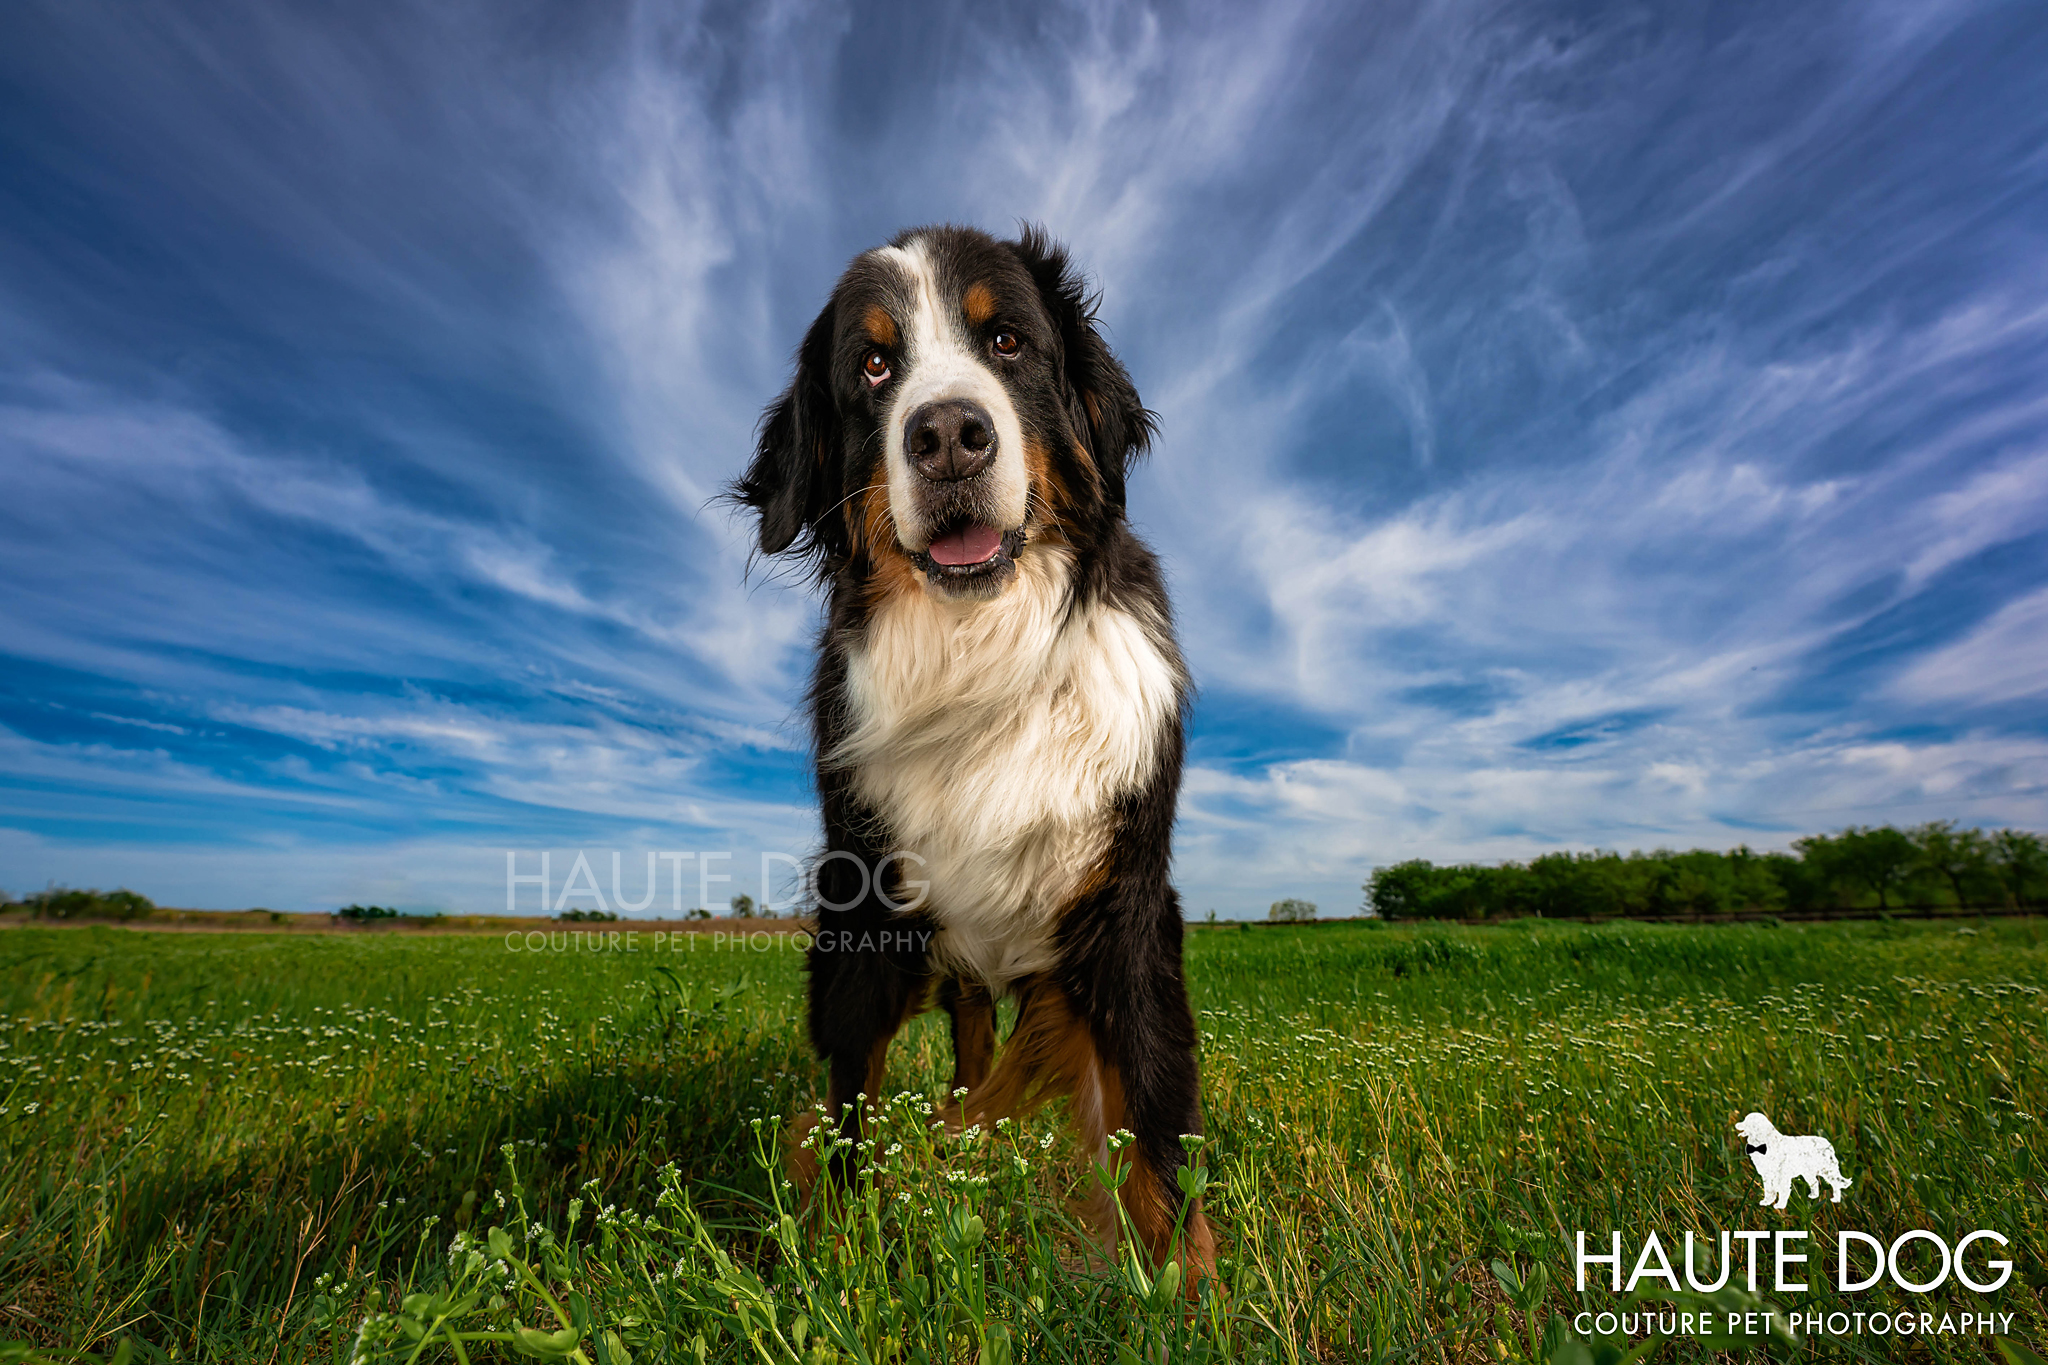 Bernese Mountain Dog stands proudly in a green grass field under a blue sky with clouds.